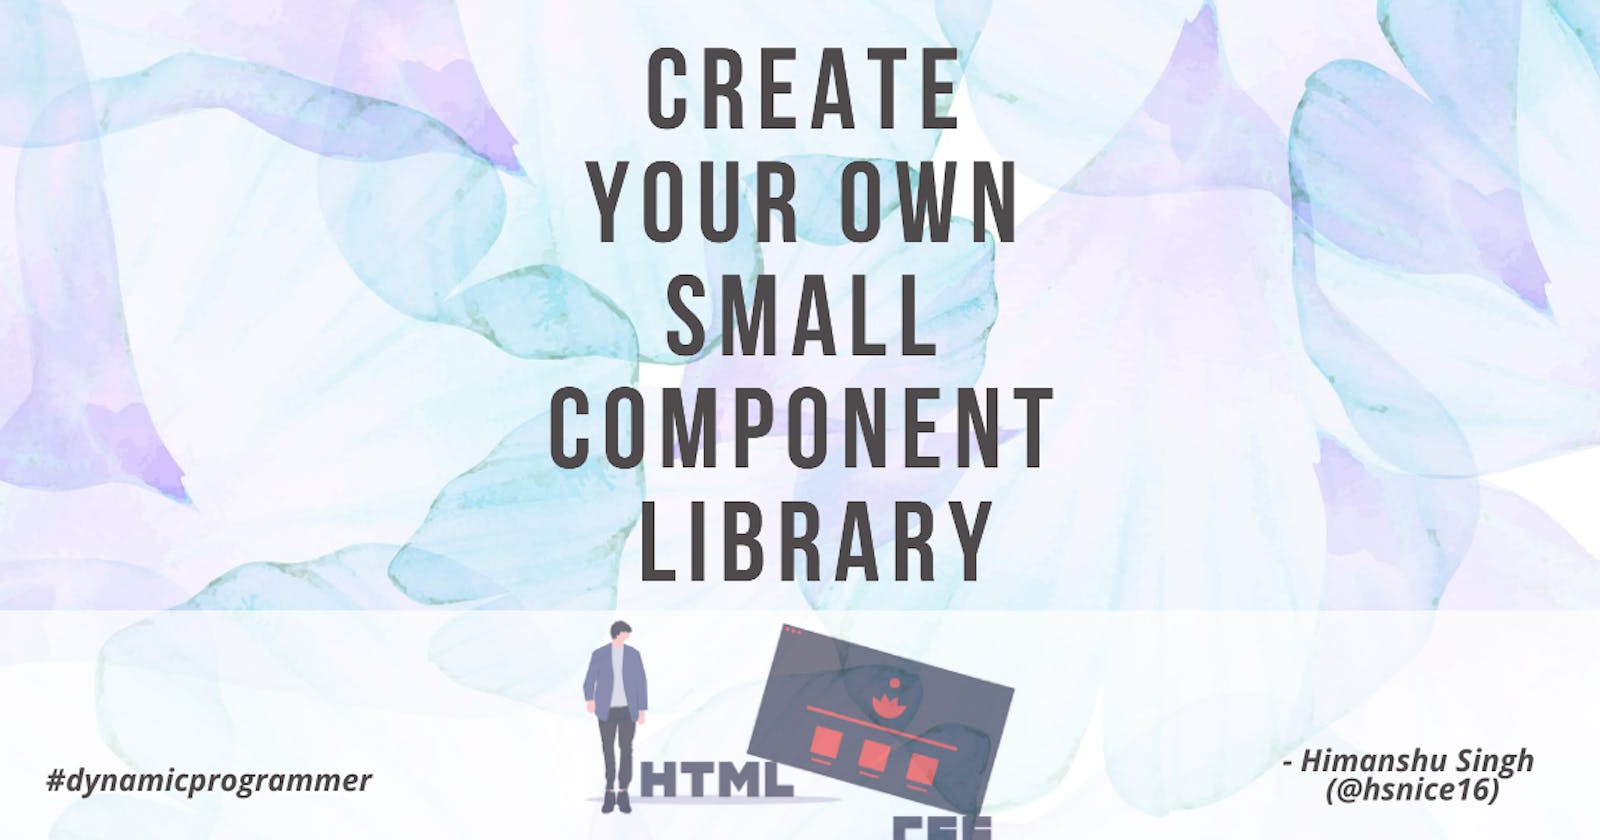 Create your own small component library